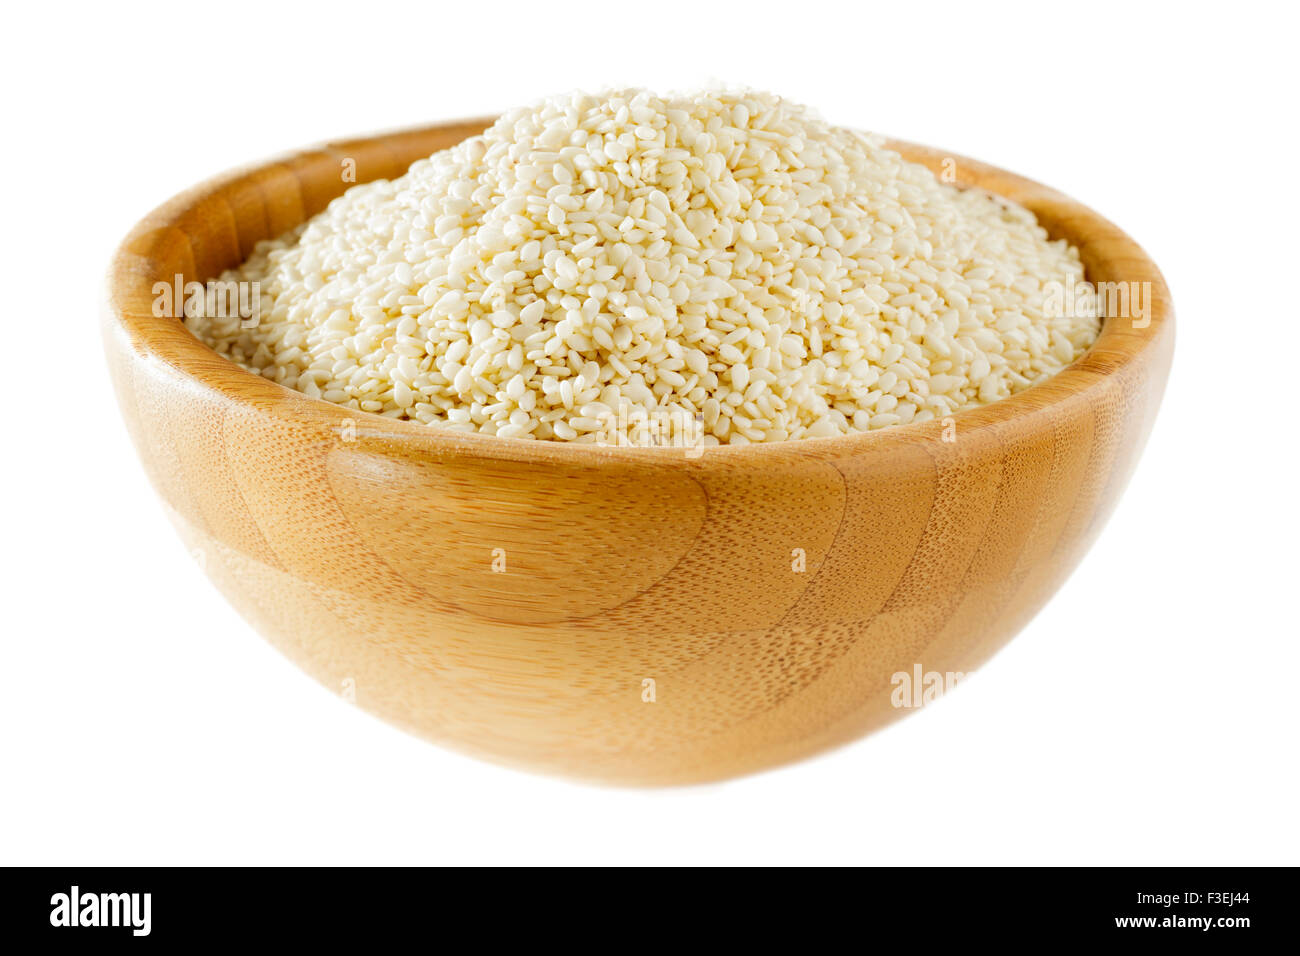 White Sesame seeds in wooden bowl Stock Photo